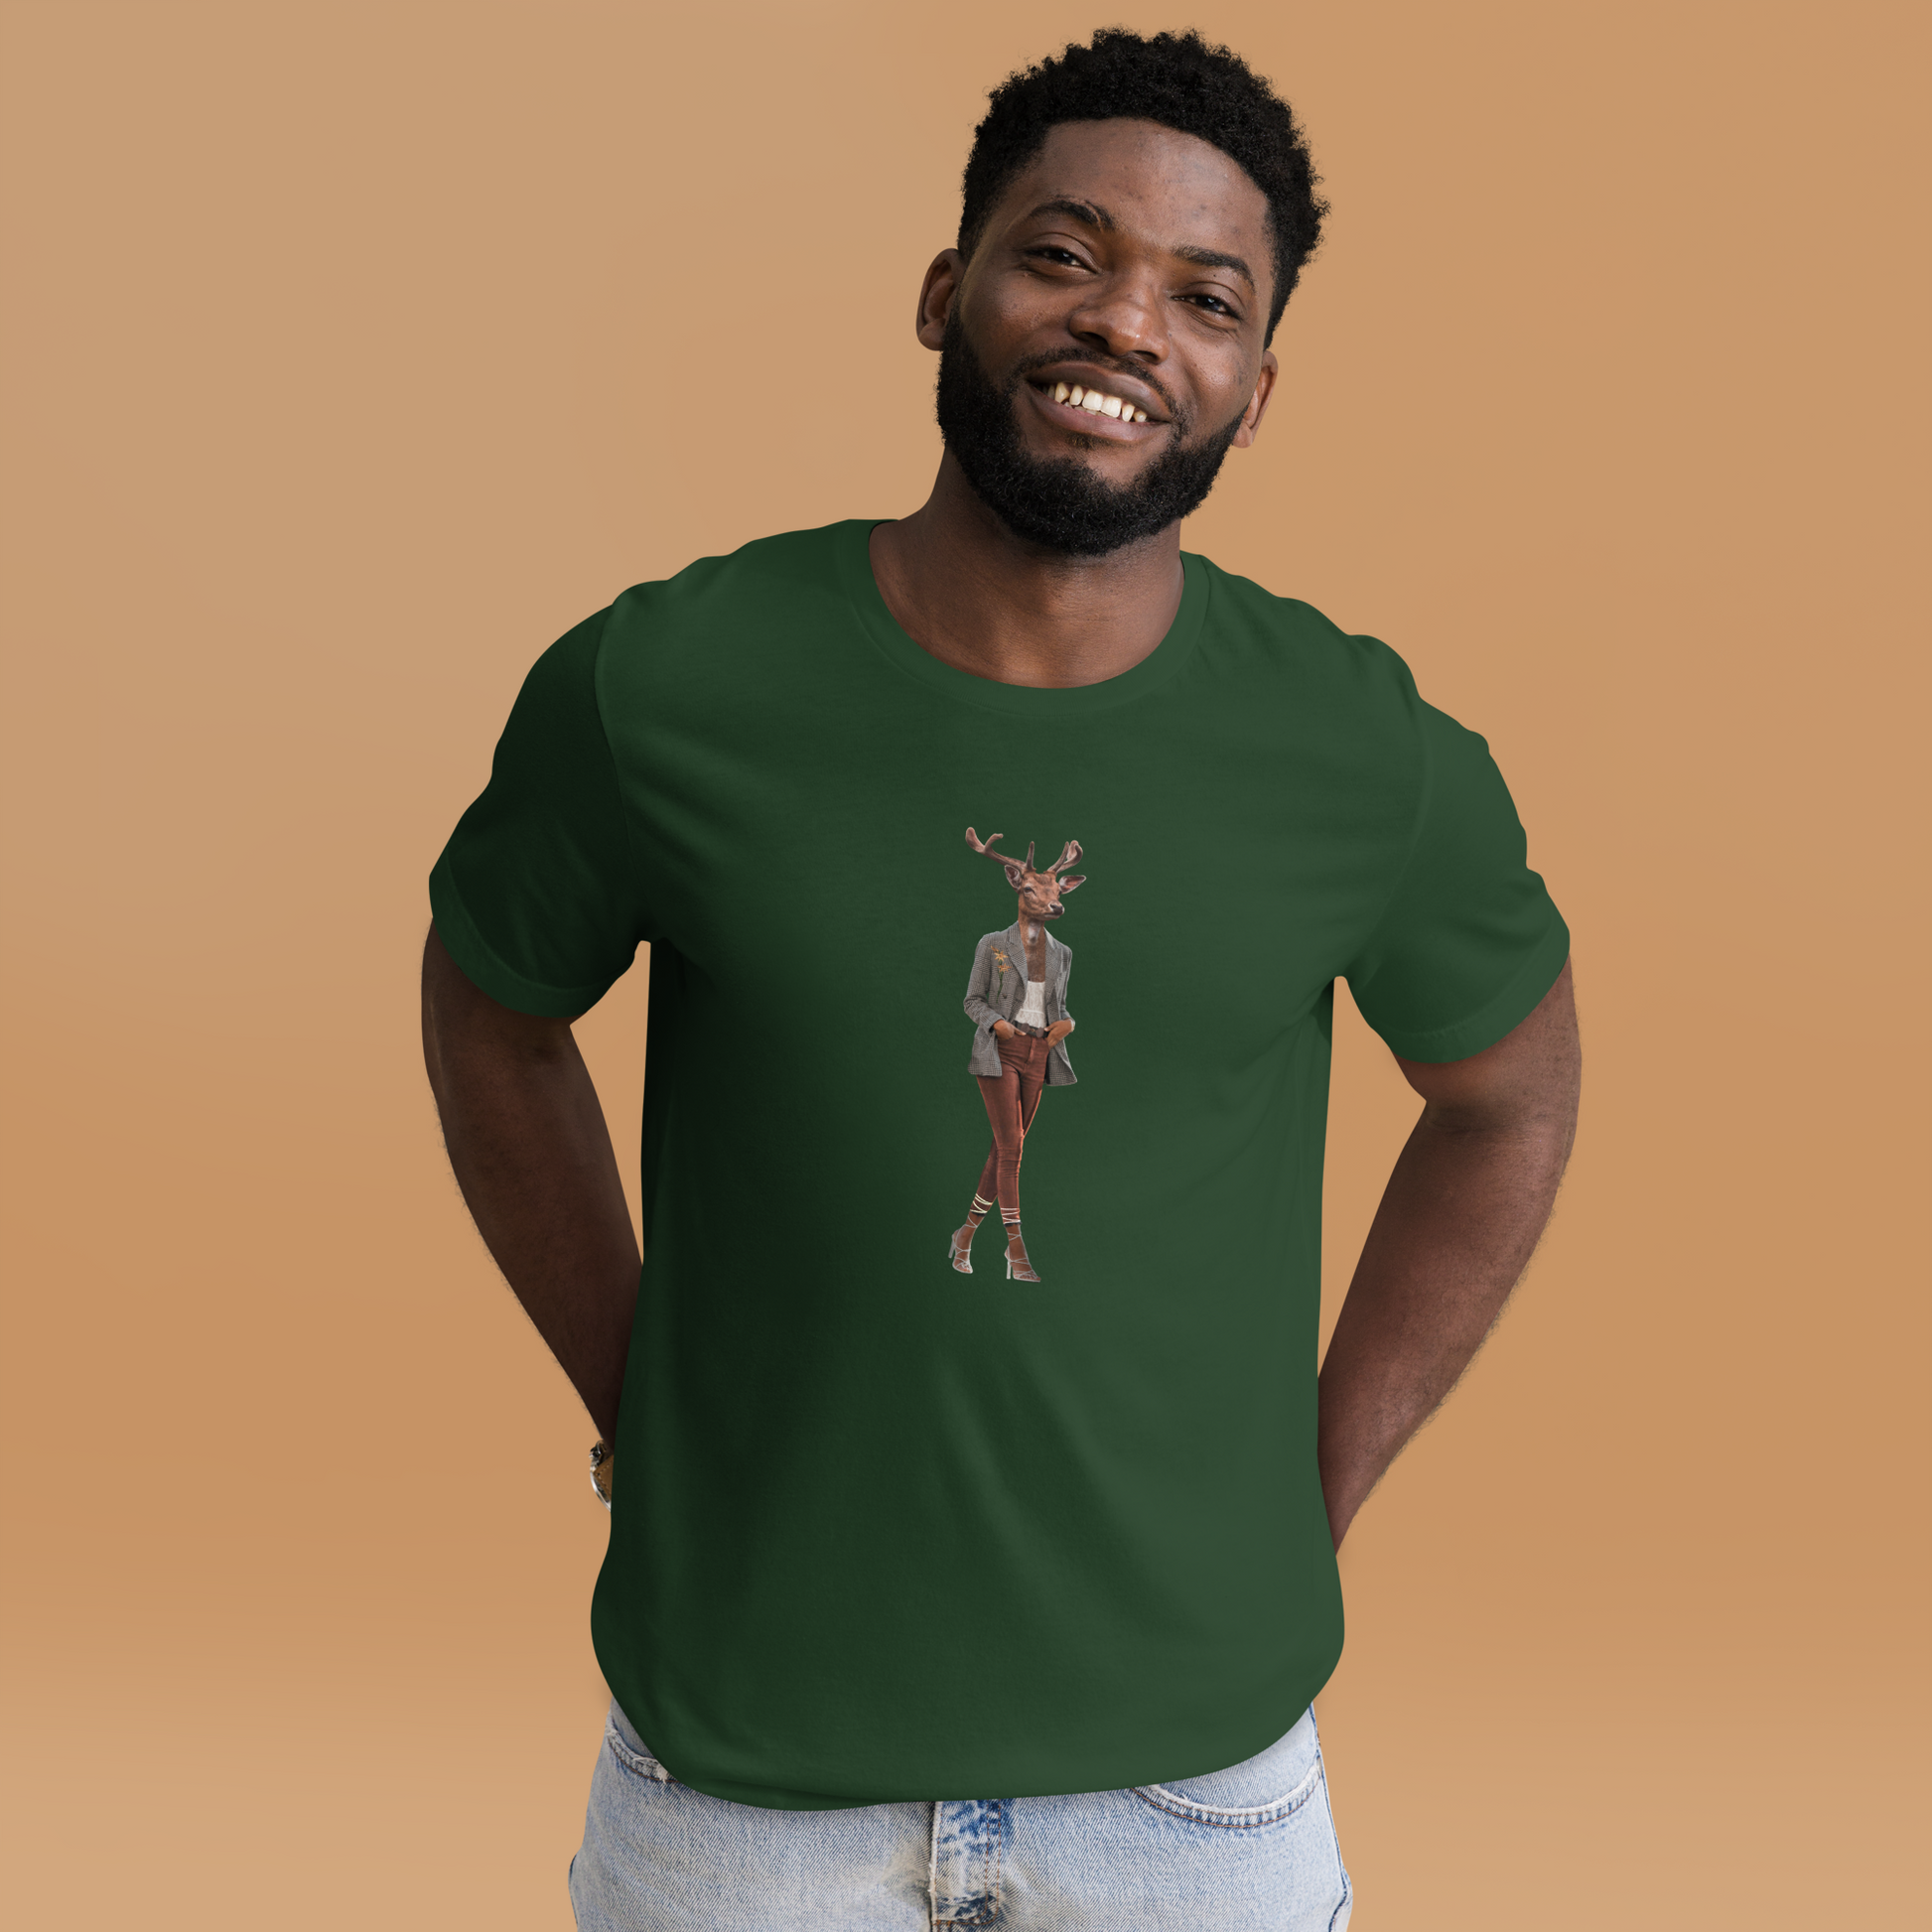 Smiling man wearing a Forest Green Premium Deer T-Shirt featuring an Anthropomorphic Deer graphic on the chest - Funny Graphic Deer Tees - Boozy Fox